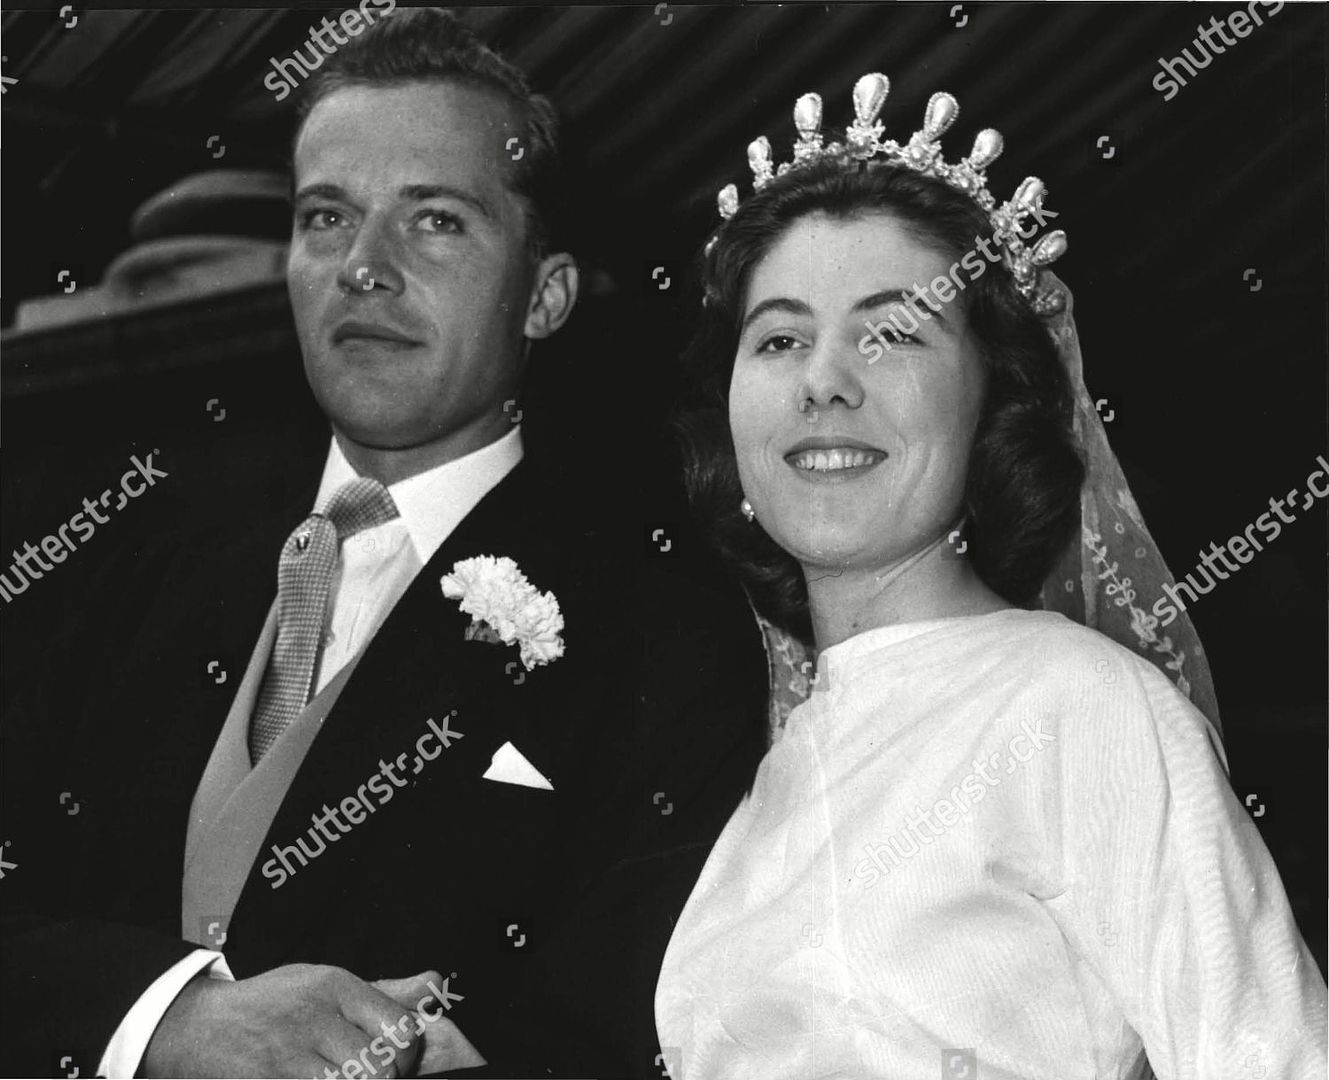 Helia 3 June 1957 wedding-dr-frederick-nicolle-and-miss-helia-stuart-walker-at-brompton-oratory-box-0554-020215-00071a-jpg-shutterstock-editorial-4767568a